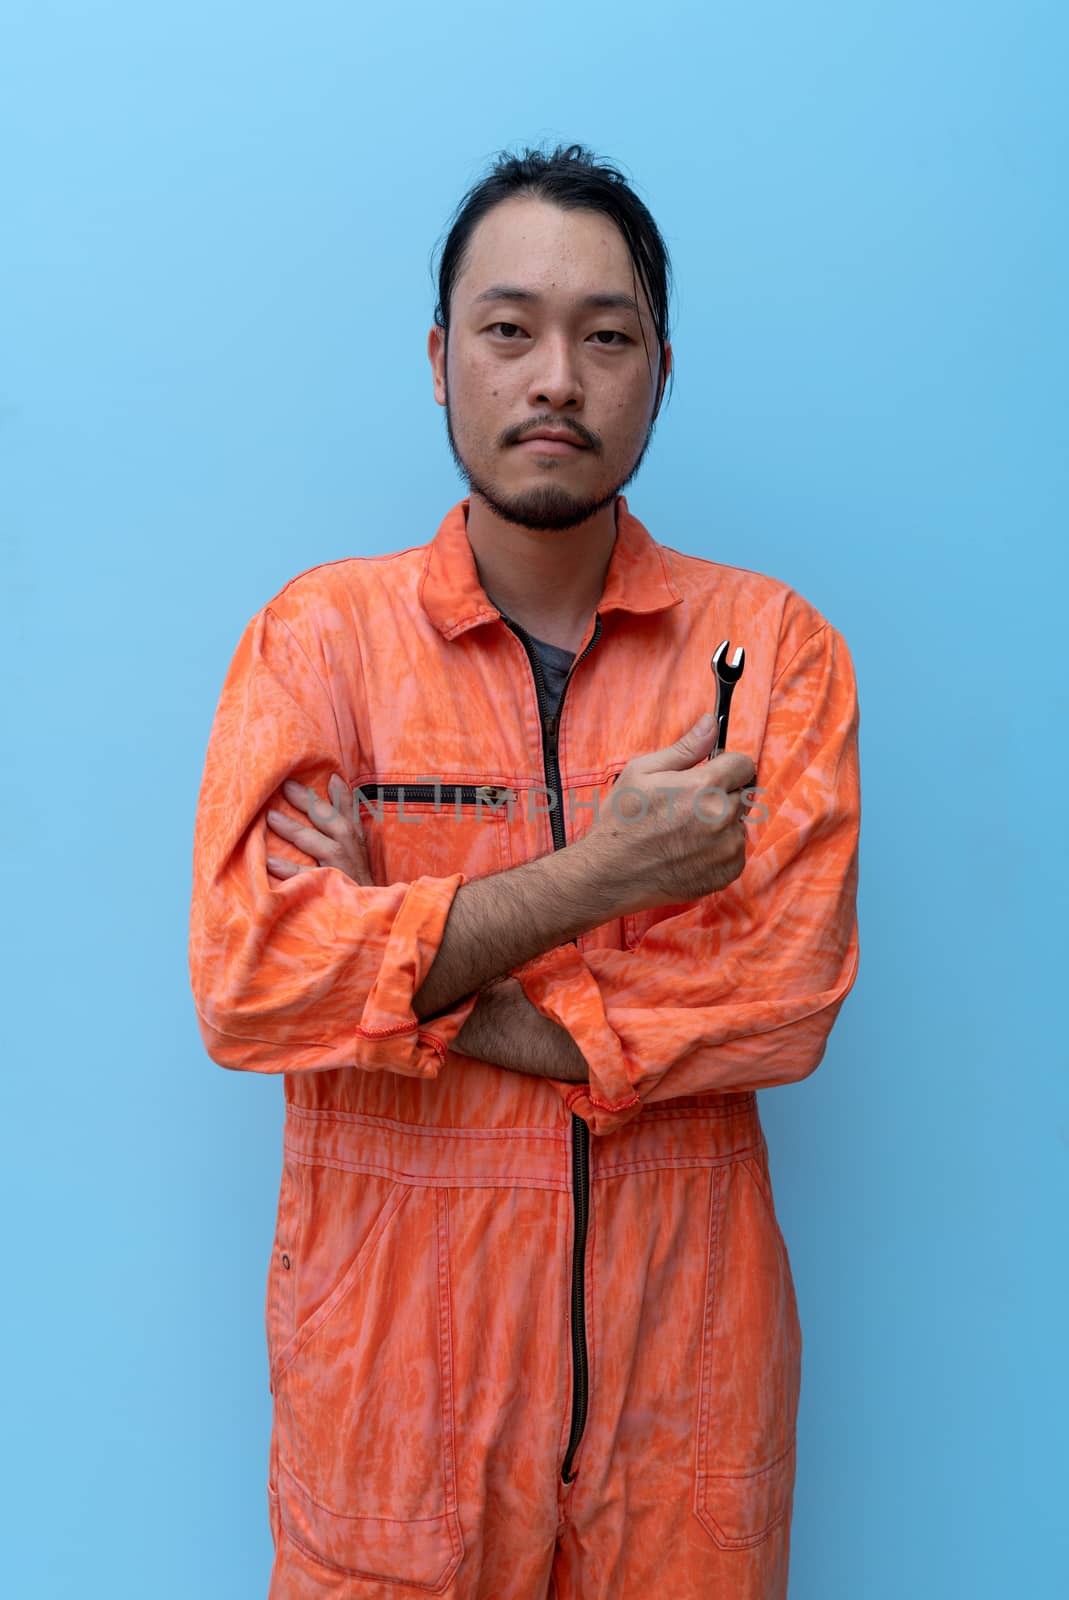 The chief mechanic in an orange uniform held a small wrench. Standing with his arms crossed on the blue screen. Portrait with studio light.